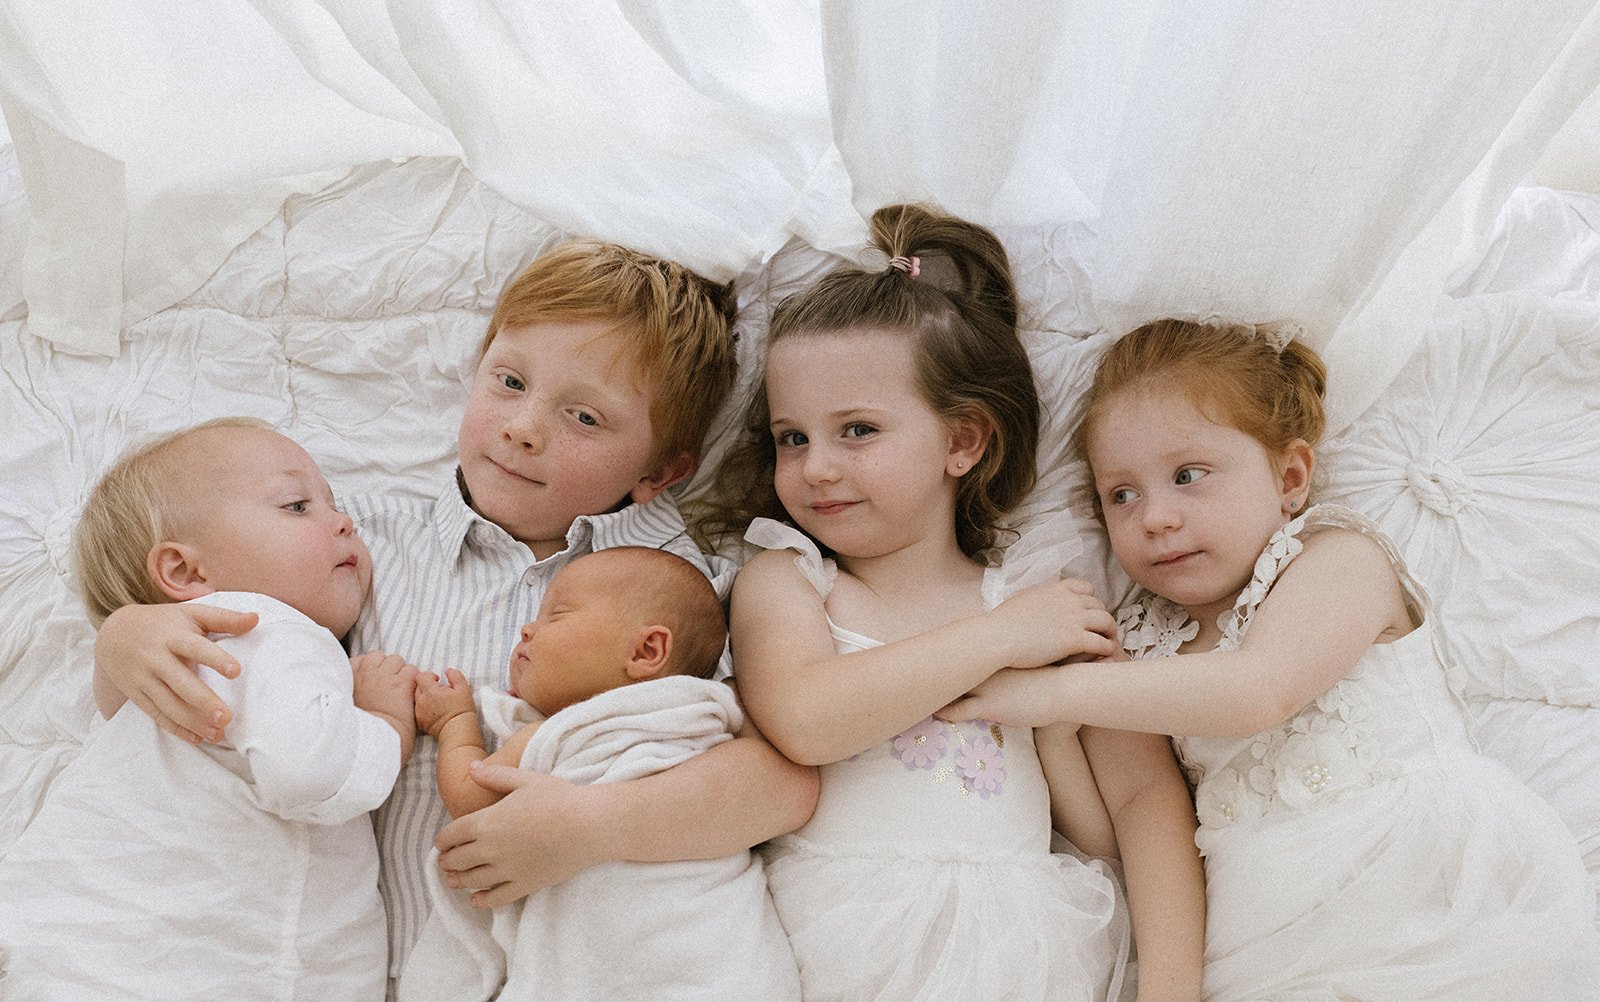 Newborn baby photographed with their 4 big siblings in Brisbane newborn photography studio